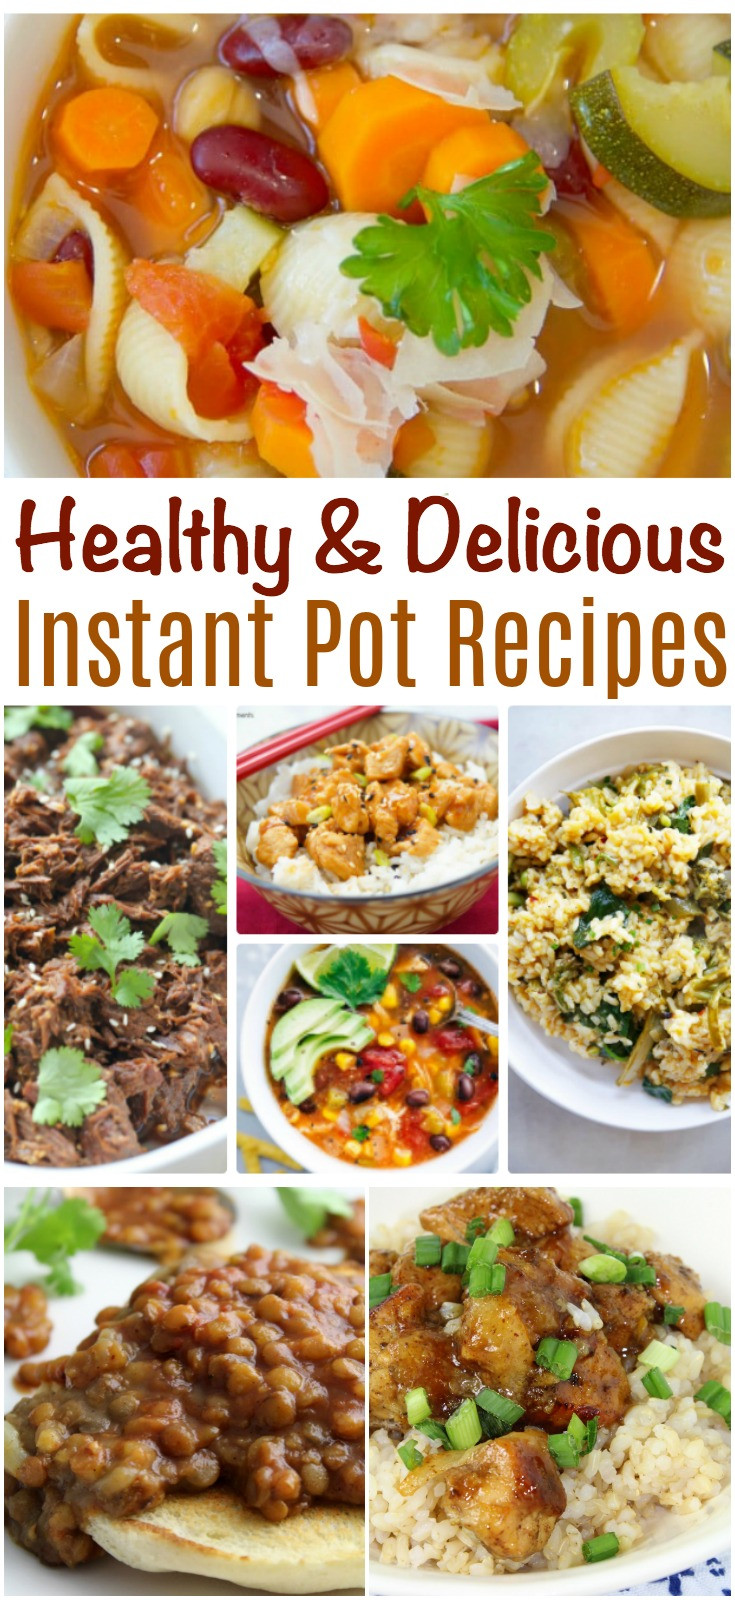 Healthy Instant Pot Dinner Recipes
 Healthy and Delicious Instant Pot Recipes